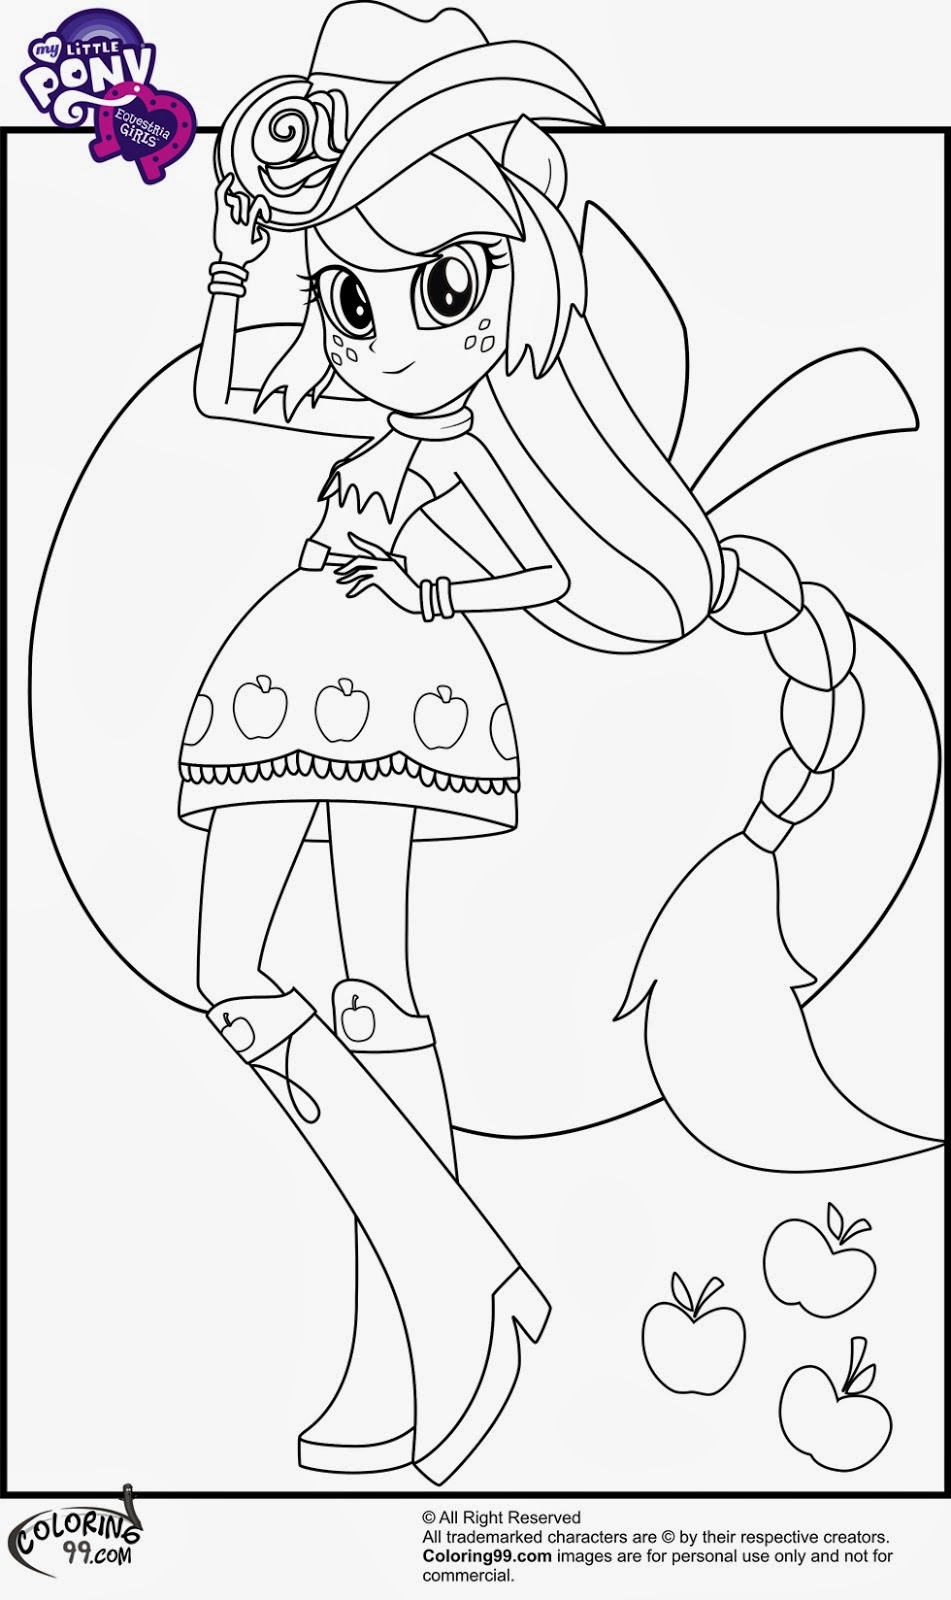 coloring pages for girls my little pony apple jack coloring pages for girls my little pony little my pony girls for pages coloring 